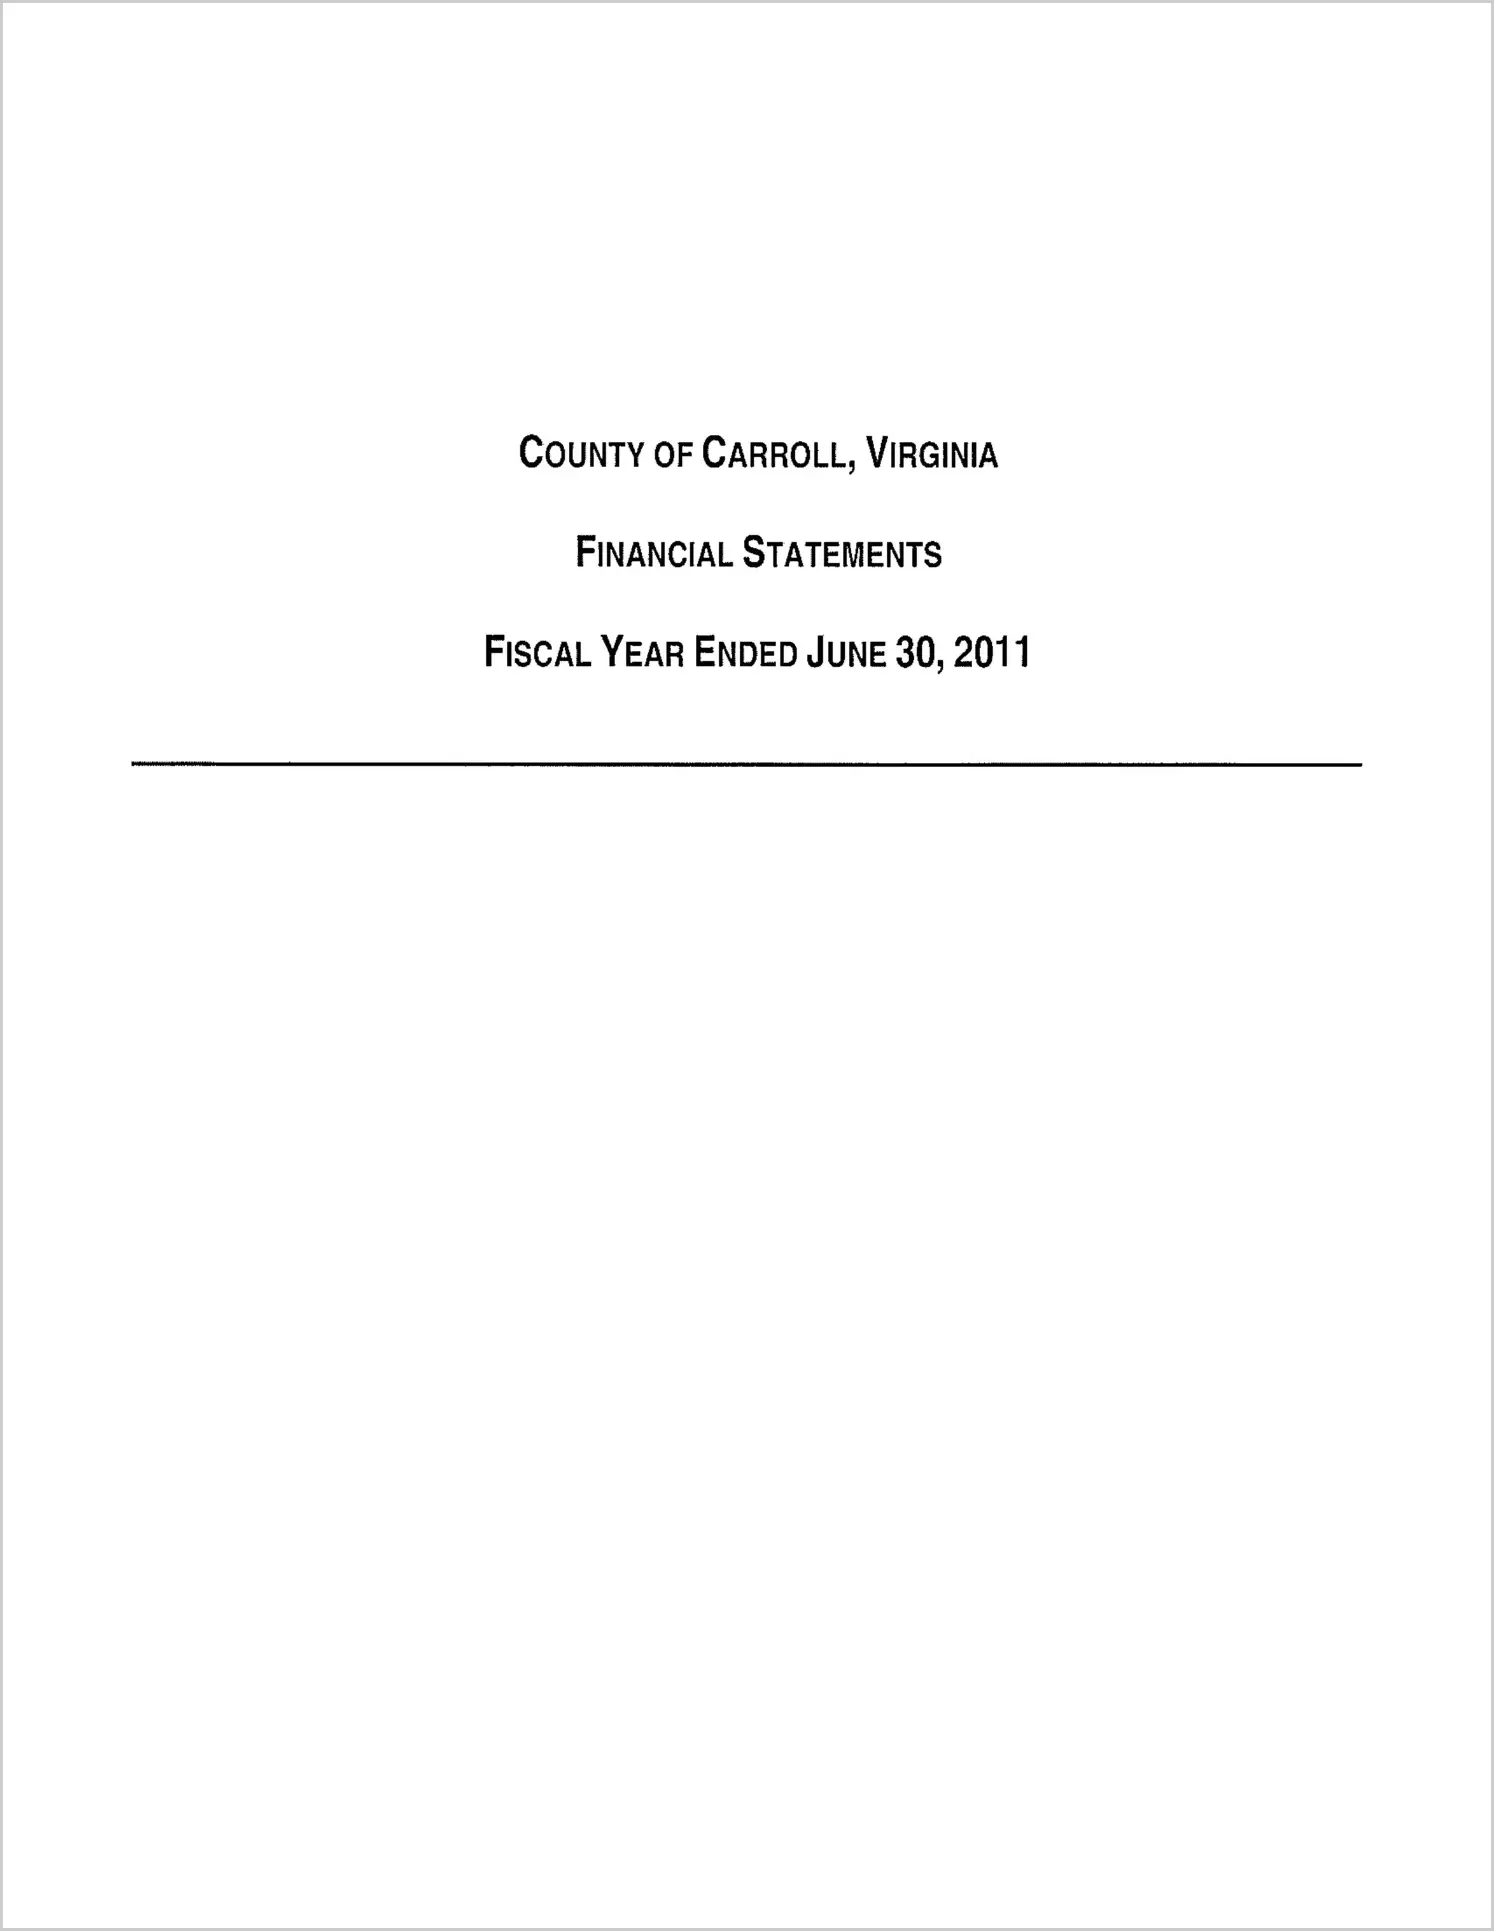 2011 Annual Financial Report for County of Carroll